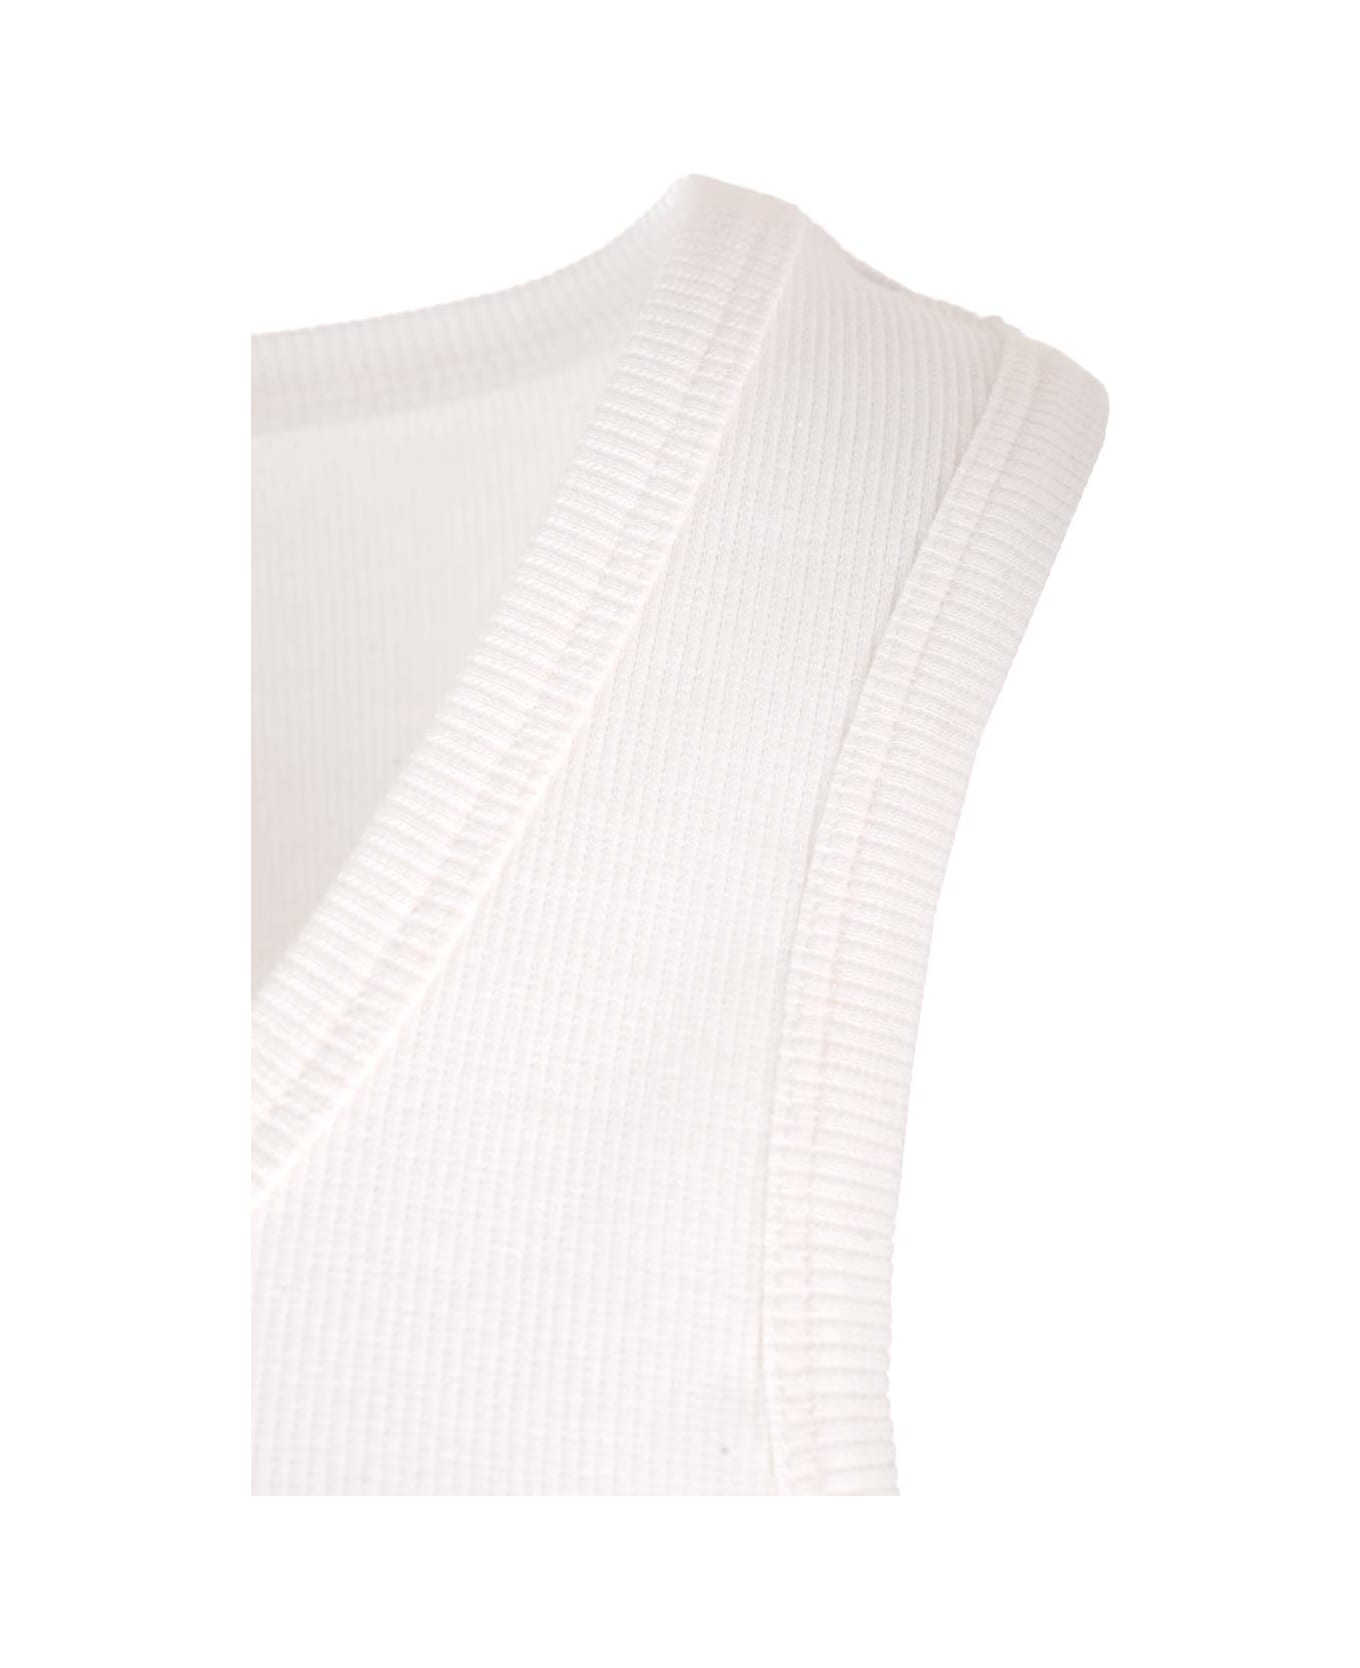 Moncler Ribbed Tank Top With Embroidered Logo - Beige タンクトップ